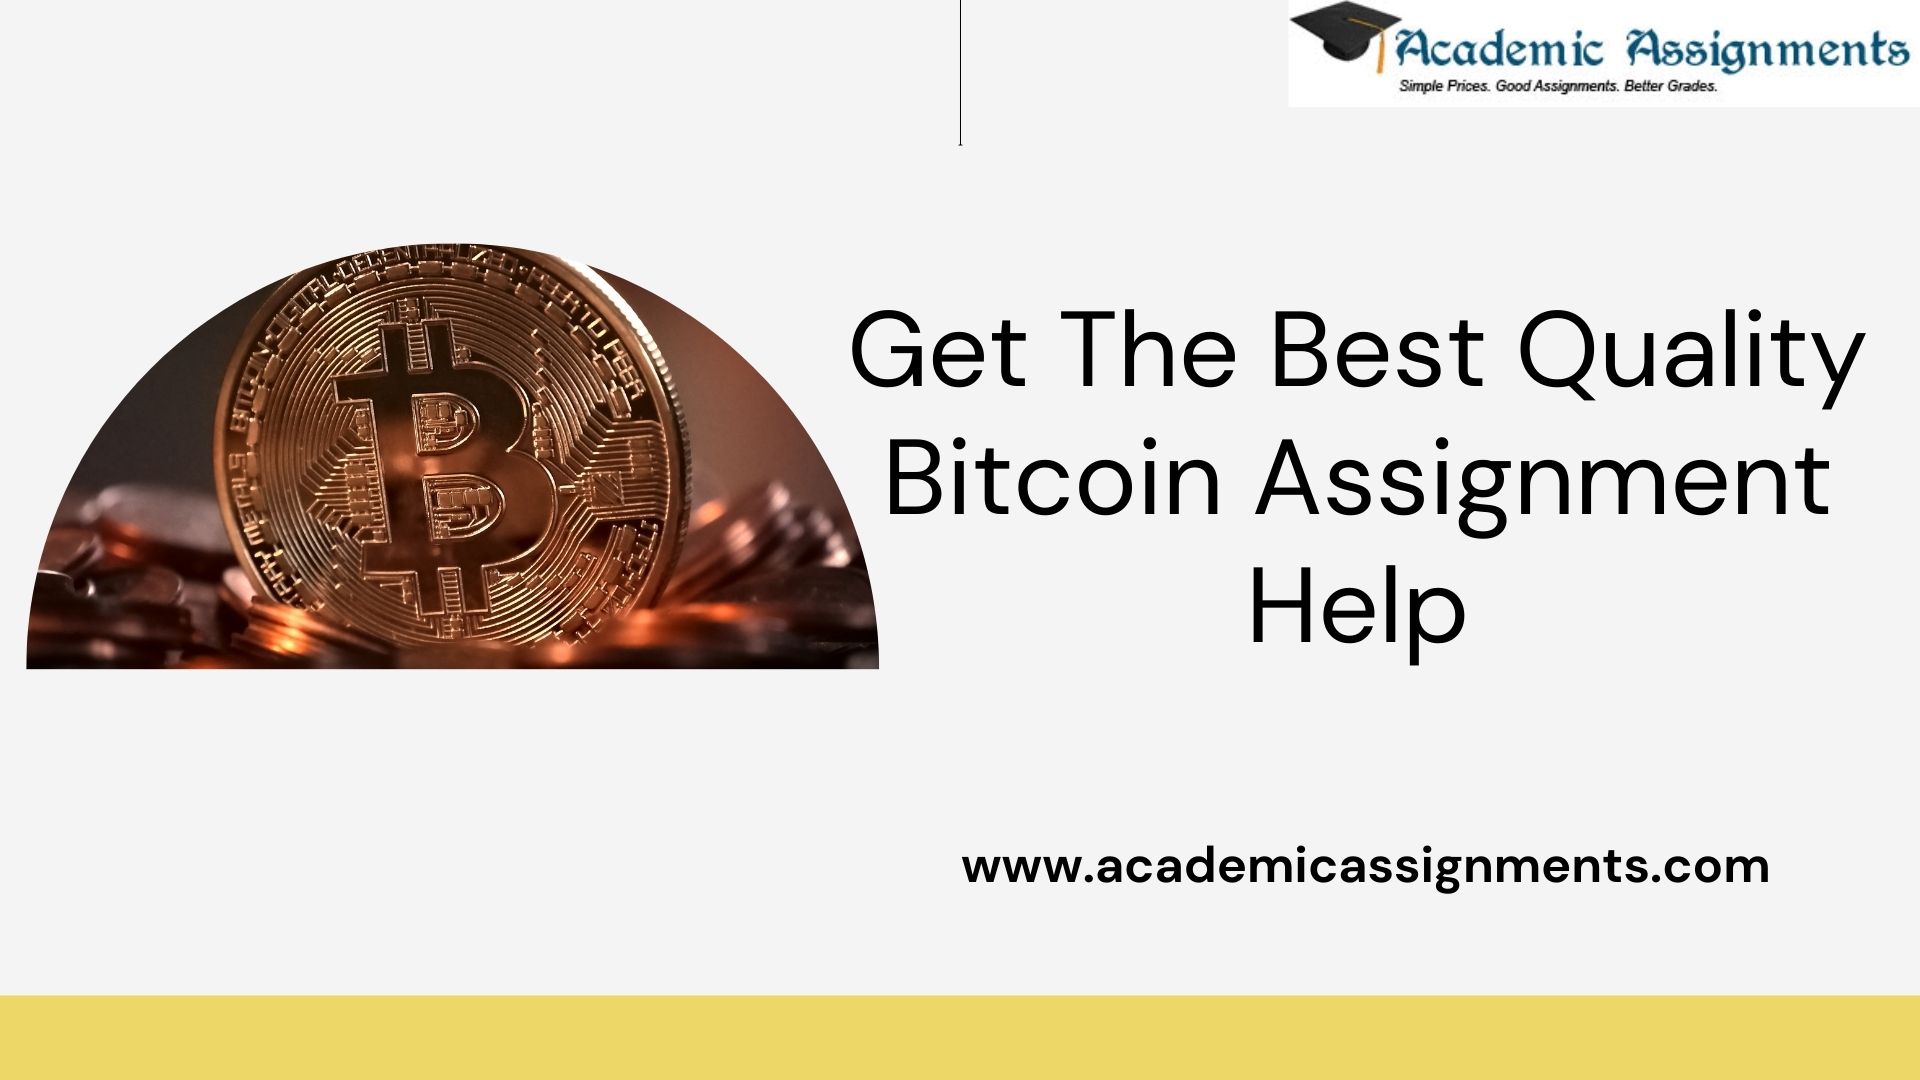 Get The Best Quality Bitcoin Assignment Help